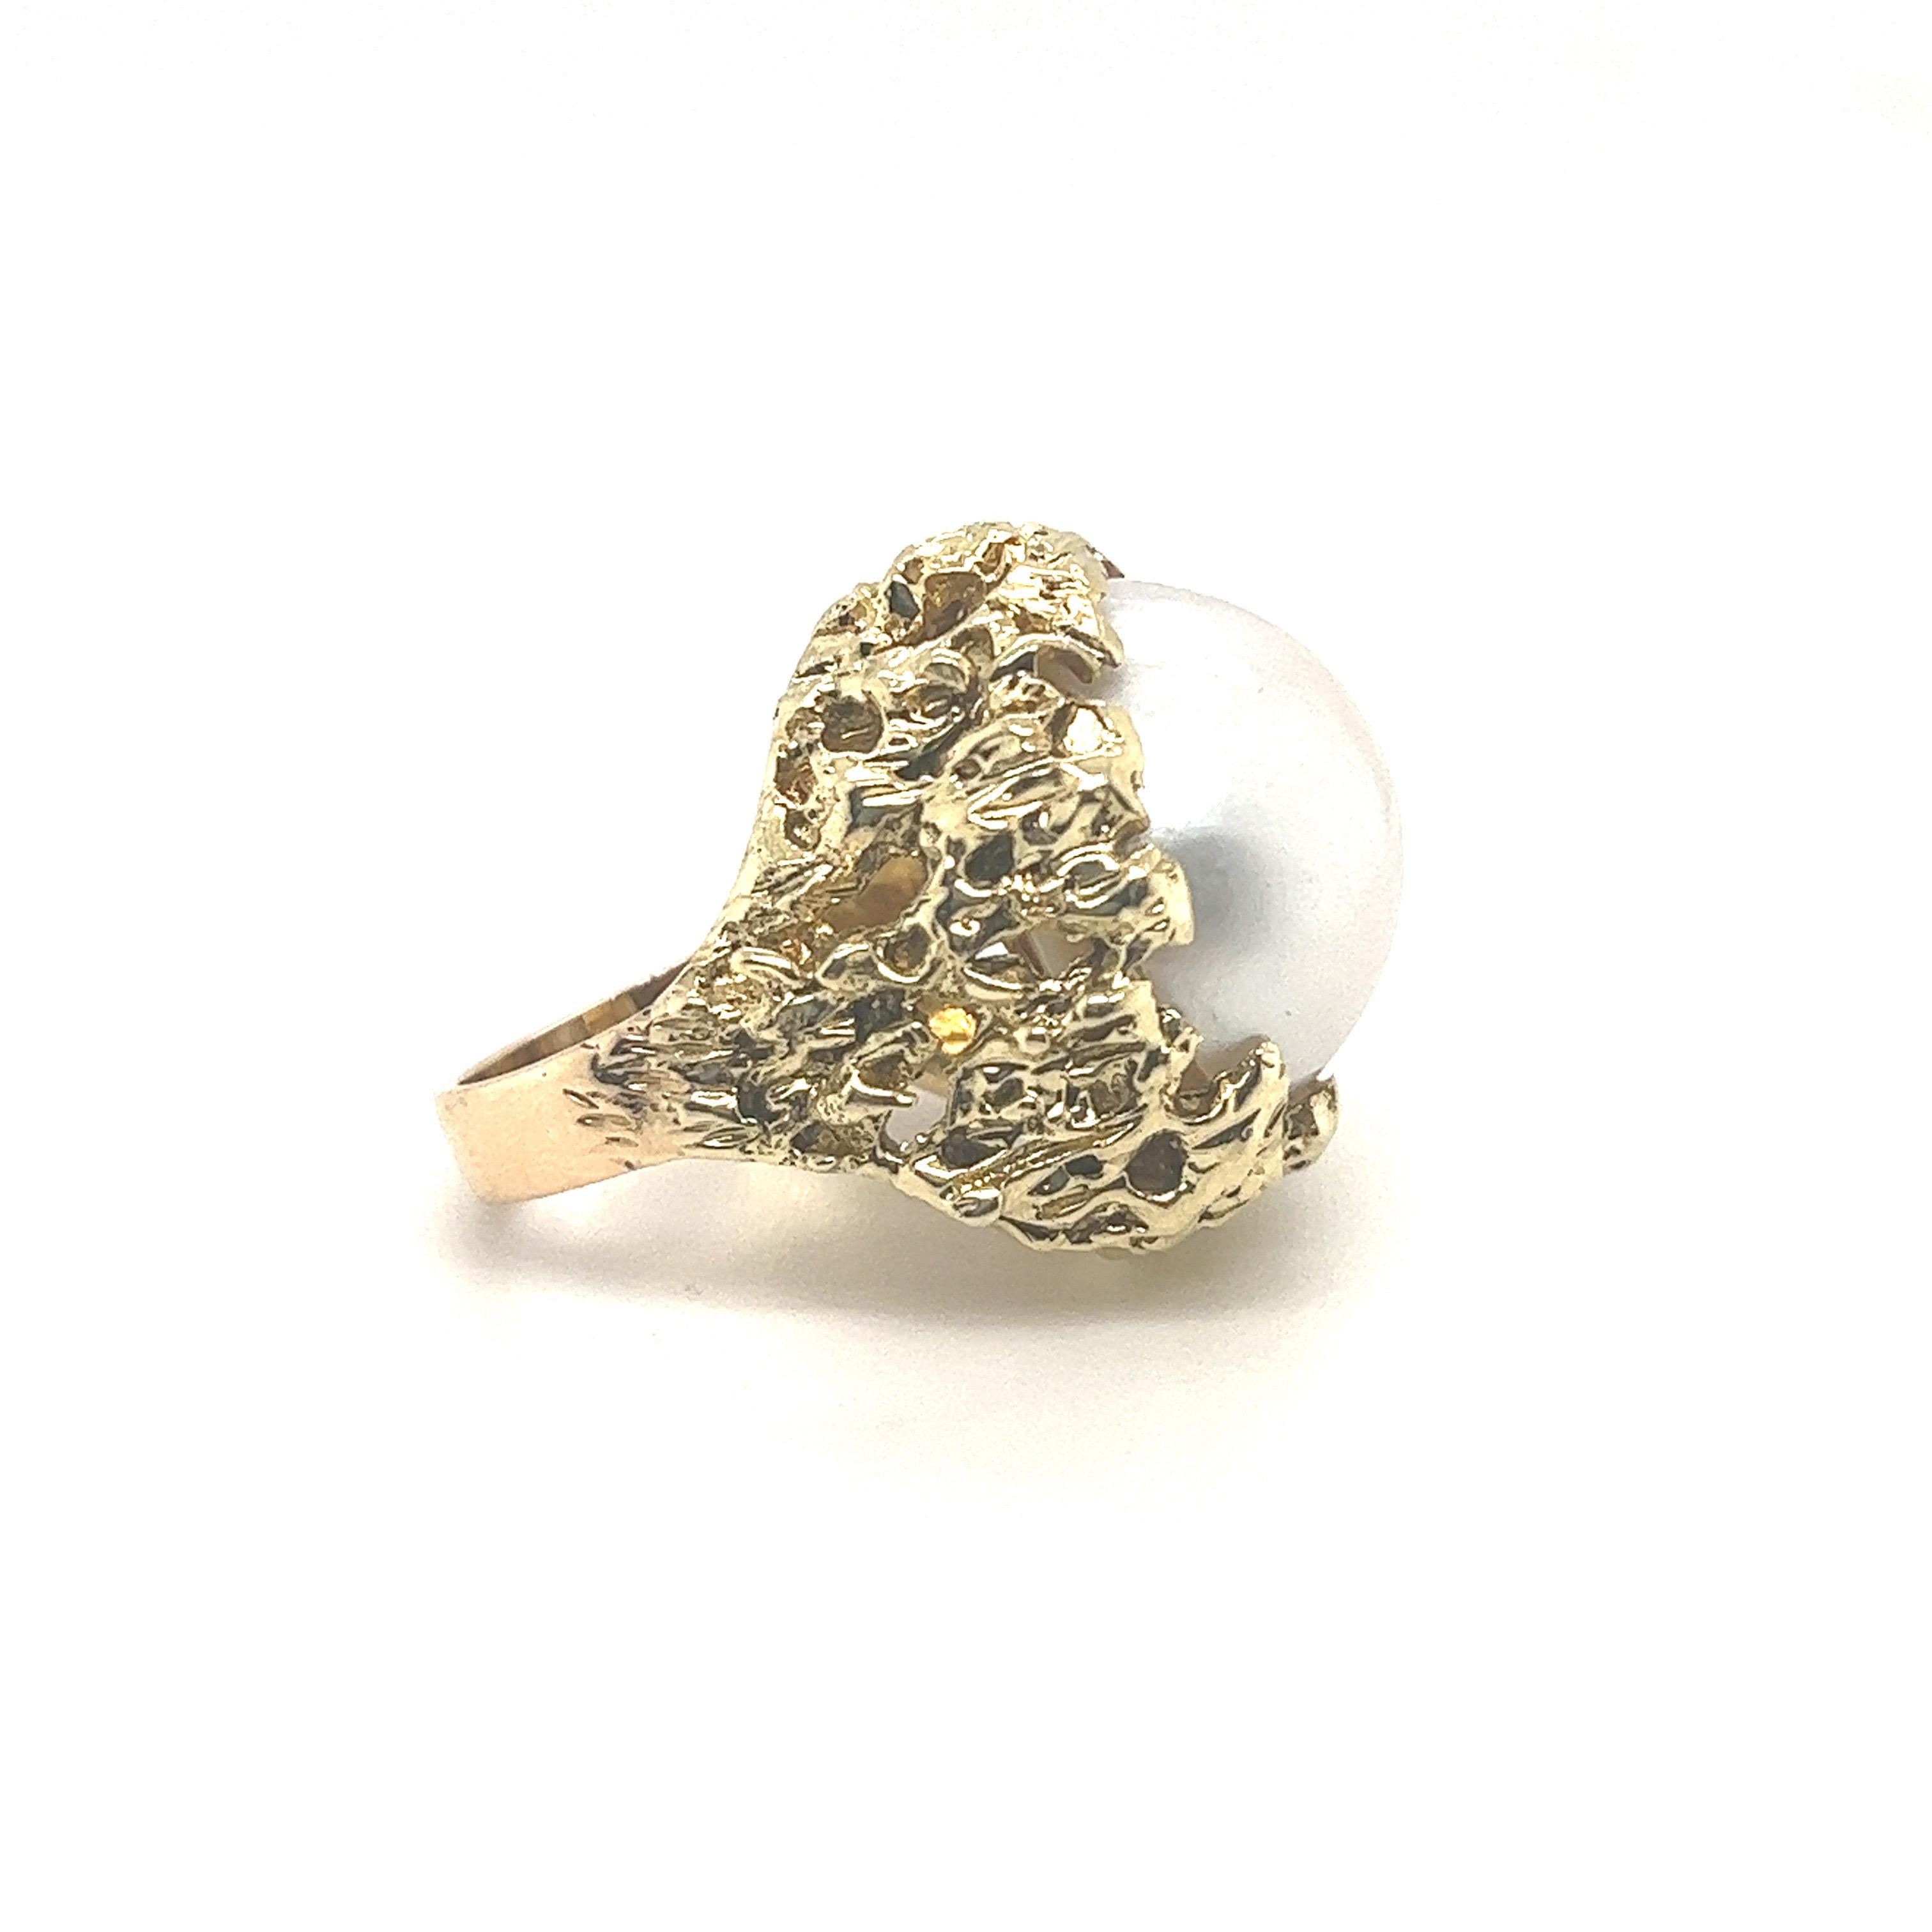 Modern 14 Karat Yellow Gold and Mabe Pearl Cocktail Ring, 1970s For Sale